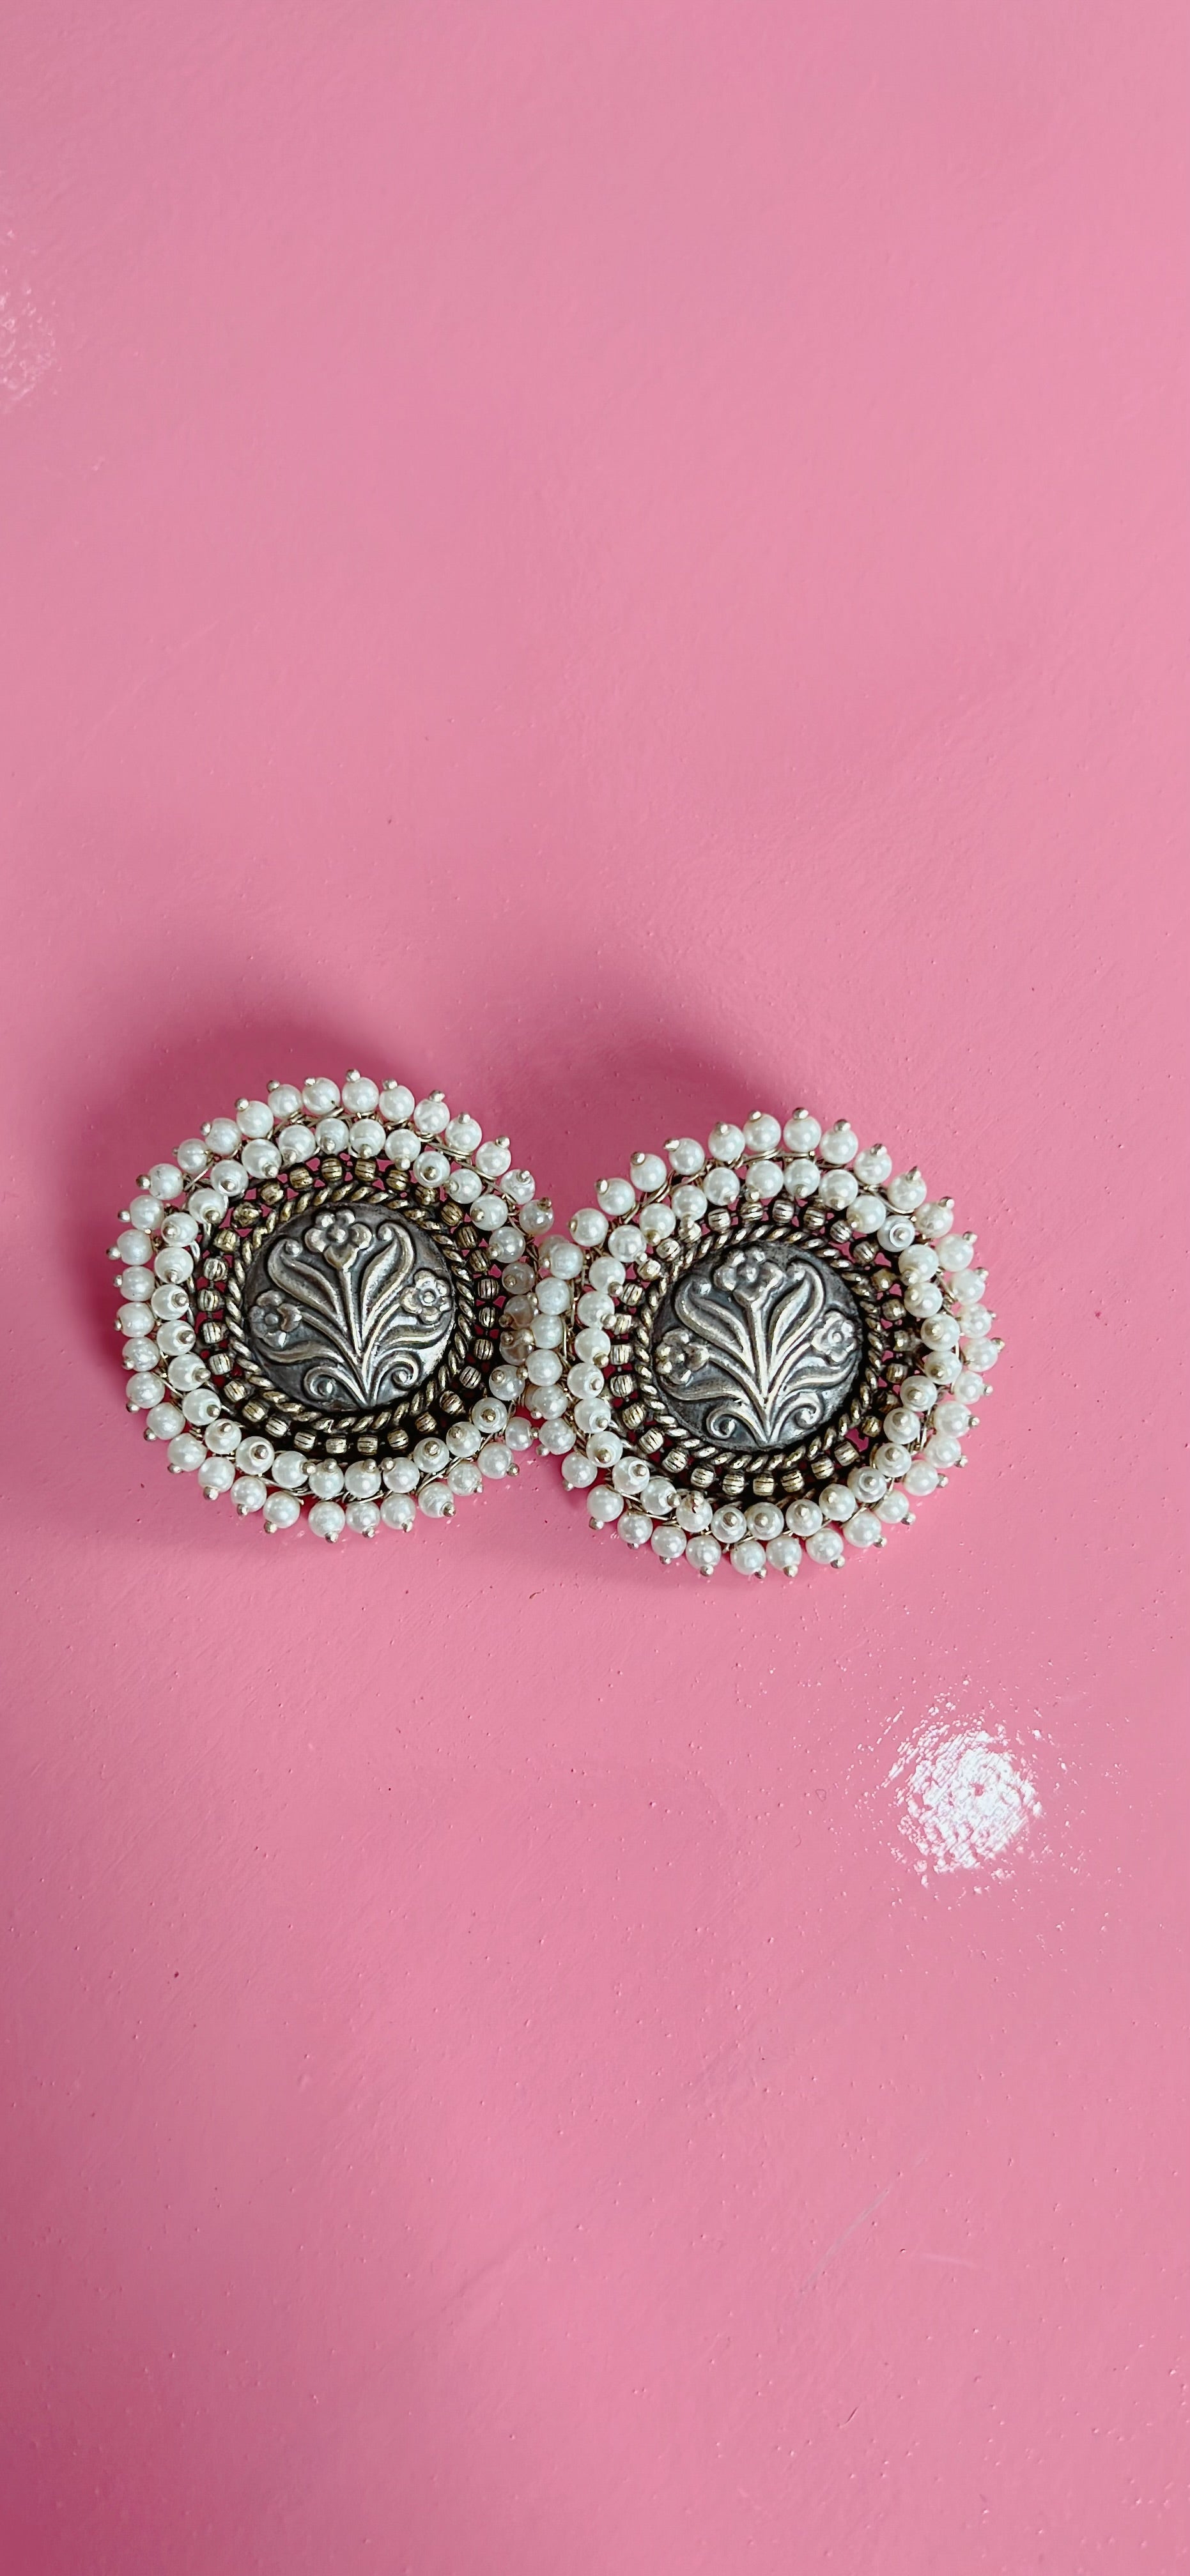 Oxidized silver stud with pearls